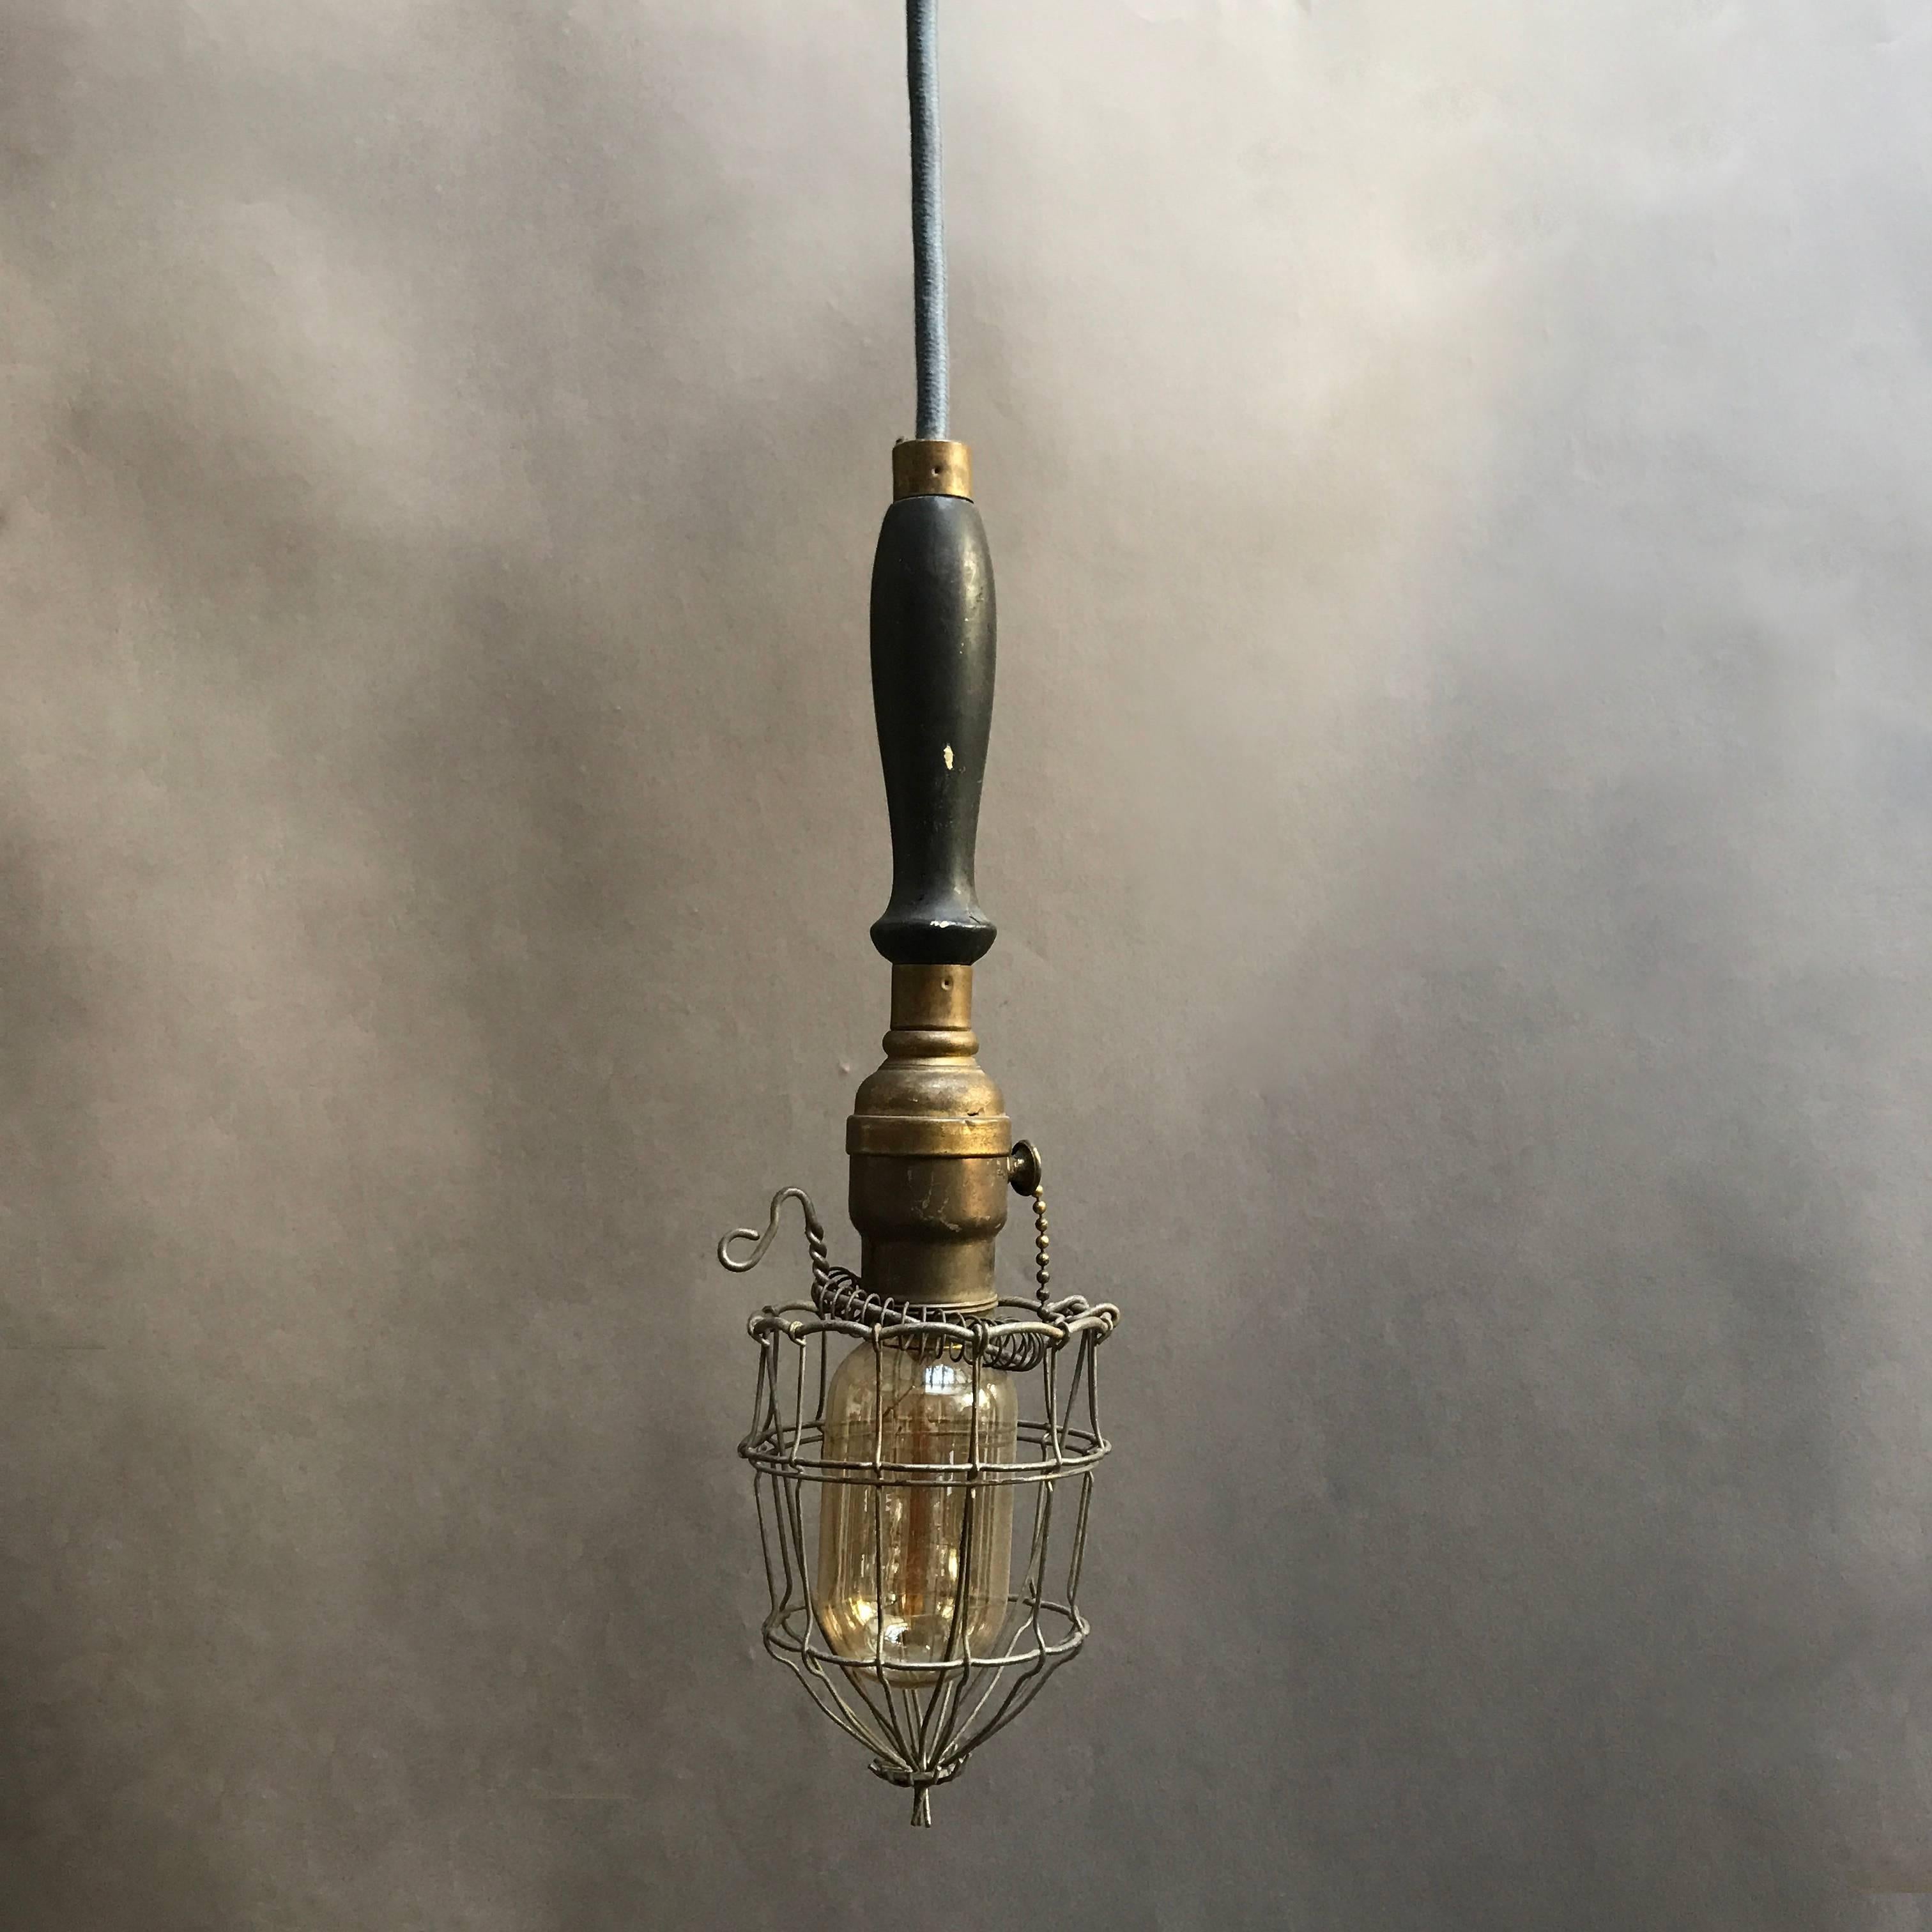 Early 20th century, Industrial, caged, utility light features a brass fitter and hardware with pull chain and black, lacquered maple handle. This light is wired for 200 watts and has 68? of wire with plug and can also be used as a wall sconce hung